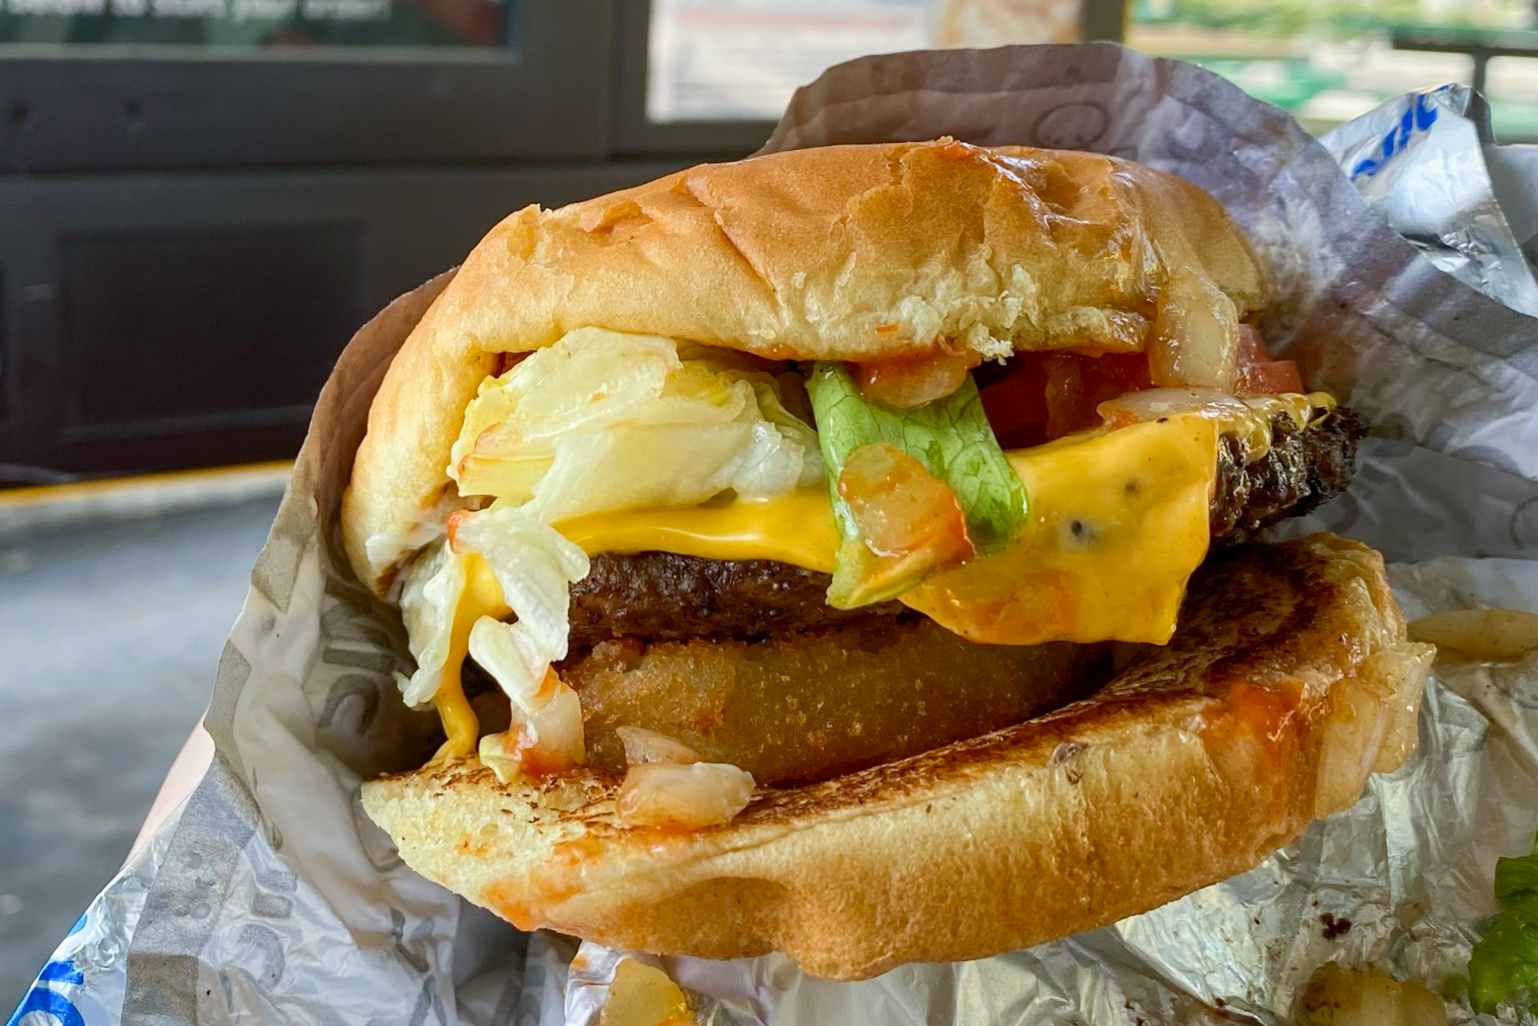 A close-up of a Sonic cheeseburger with onion rings added to it.